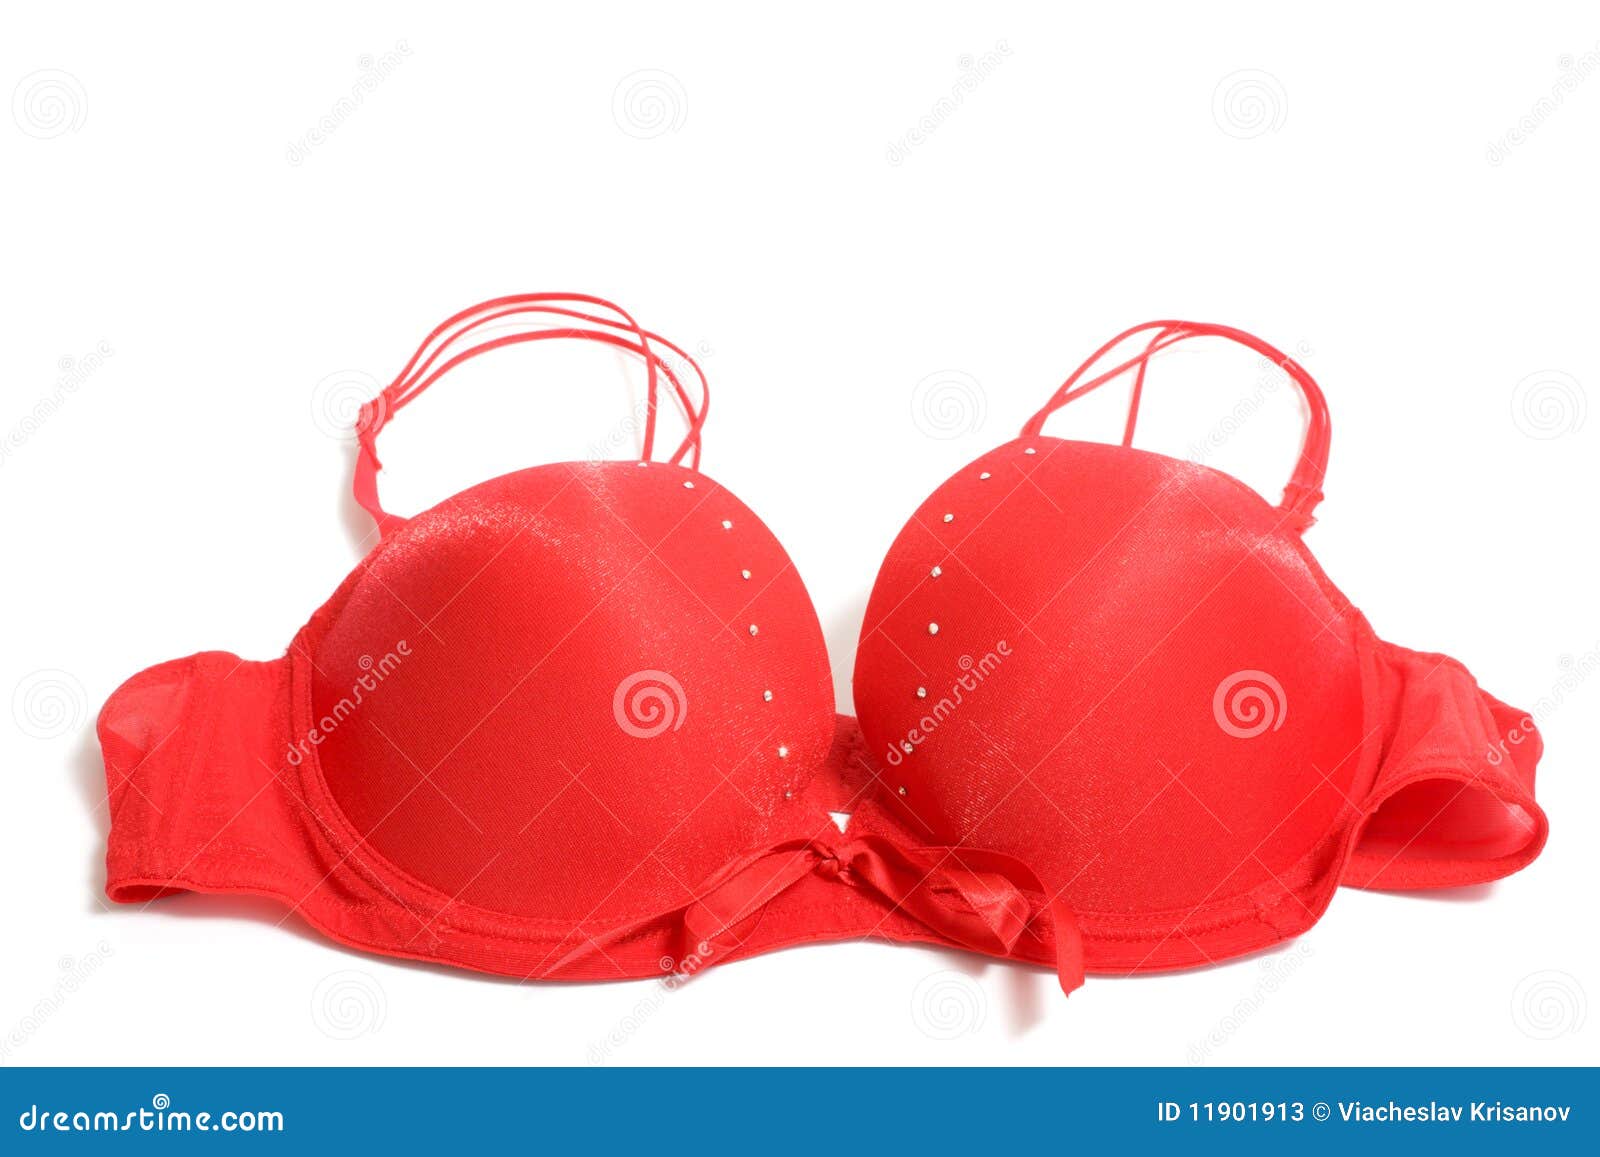 Red bra stock image. Image of color, textile, satin, padded - 11901913